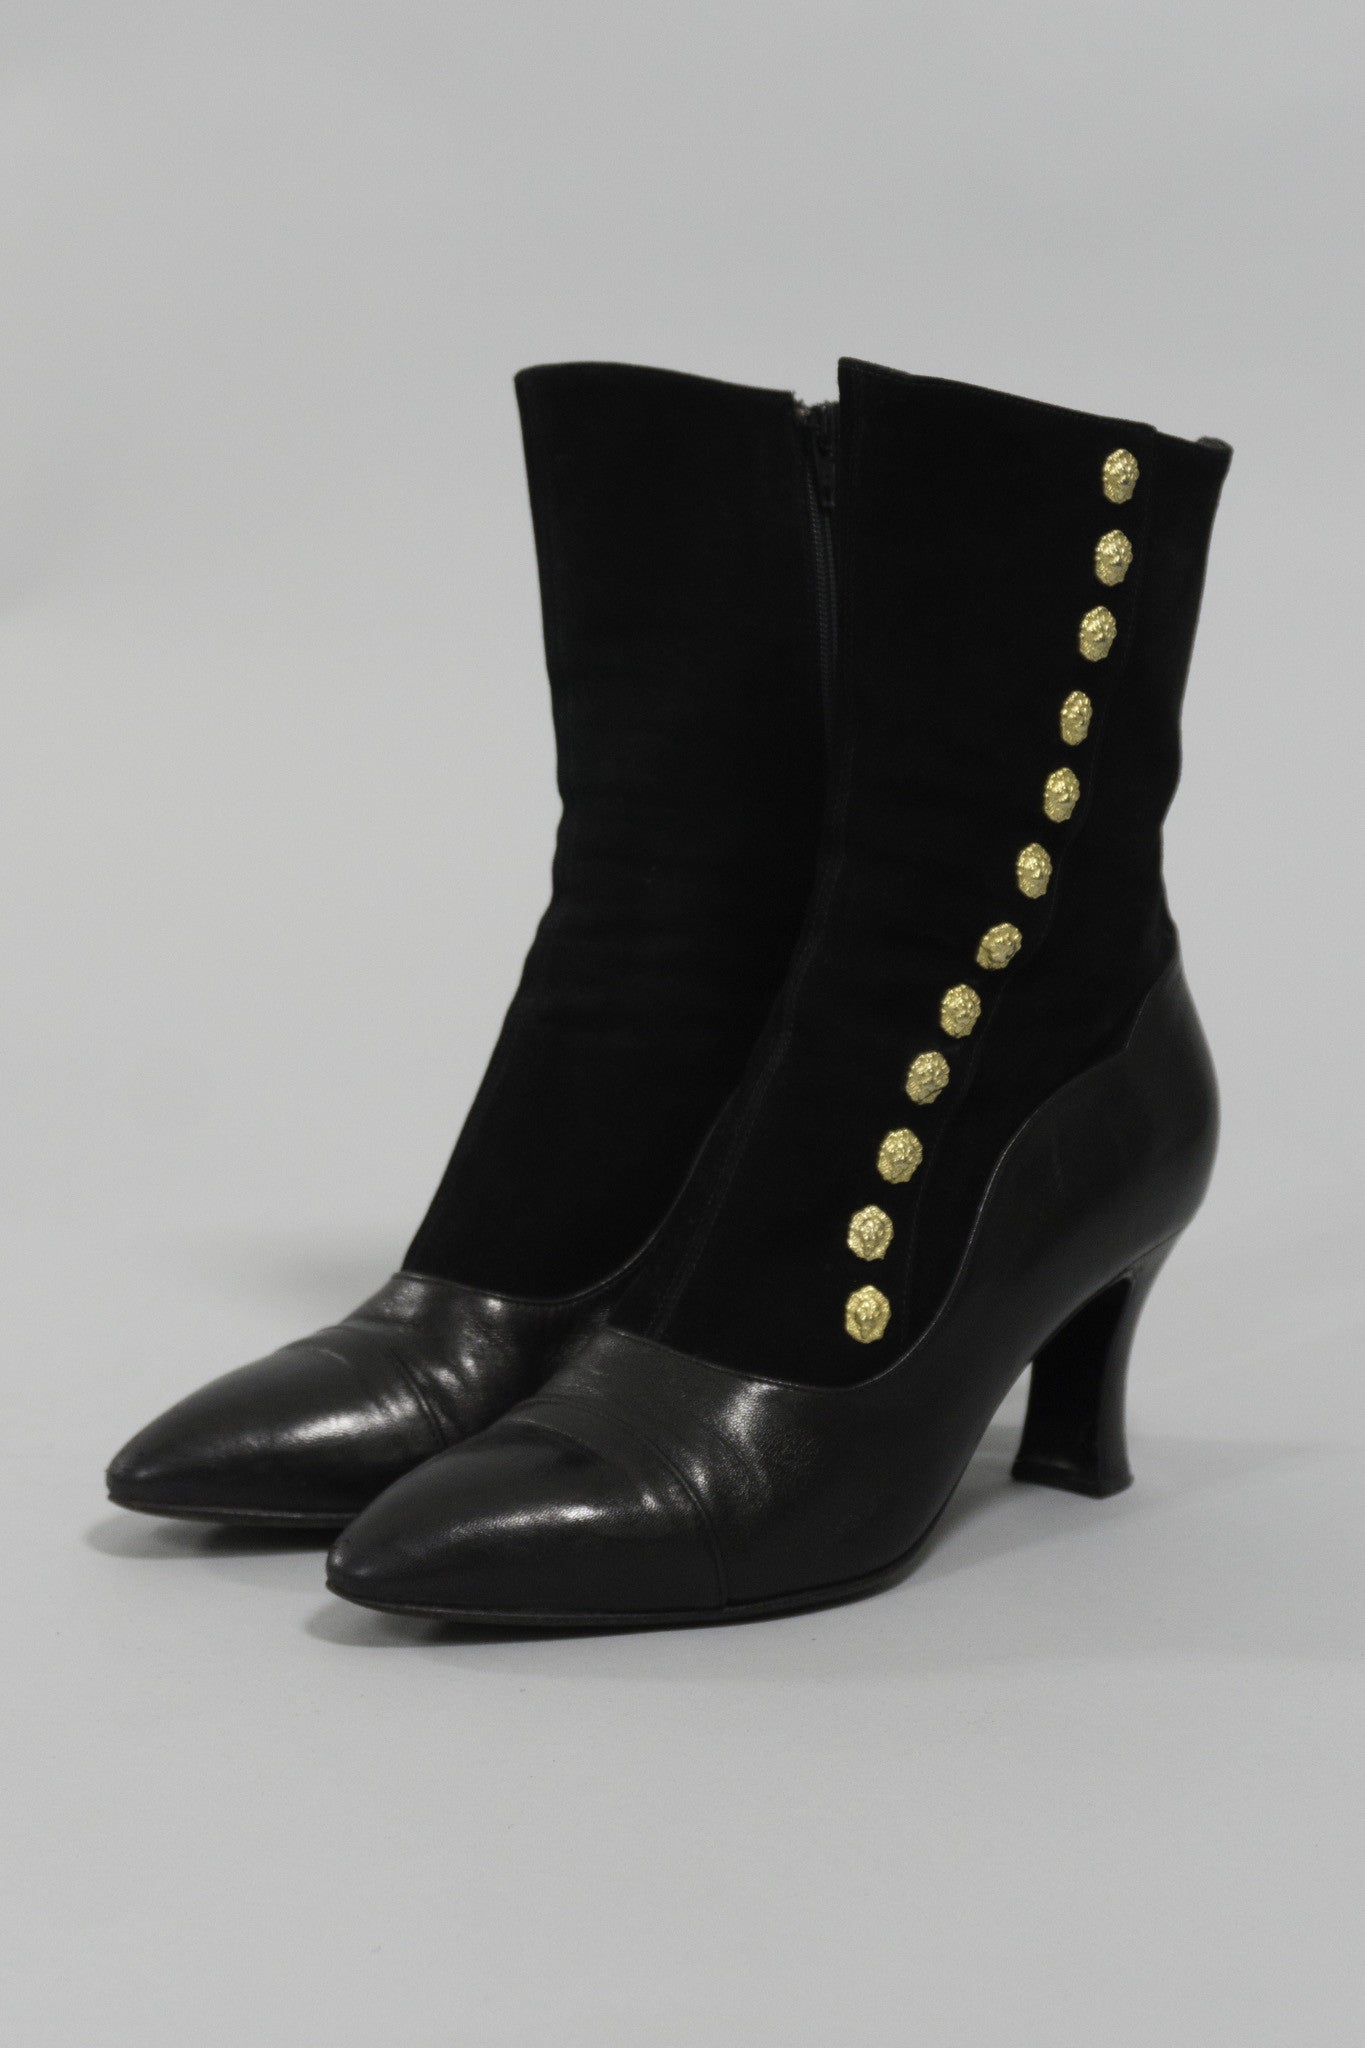 Versus Gianni Versace lion ankle boot FrontSide